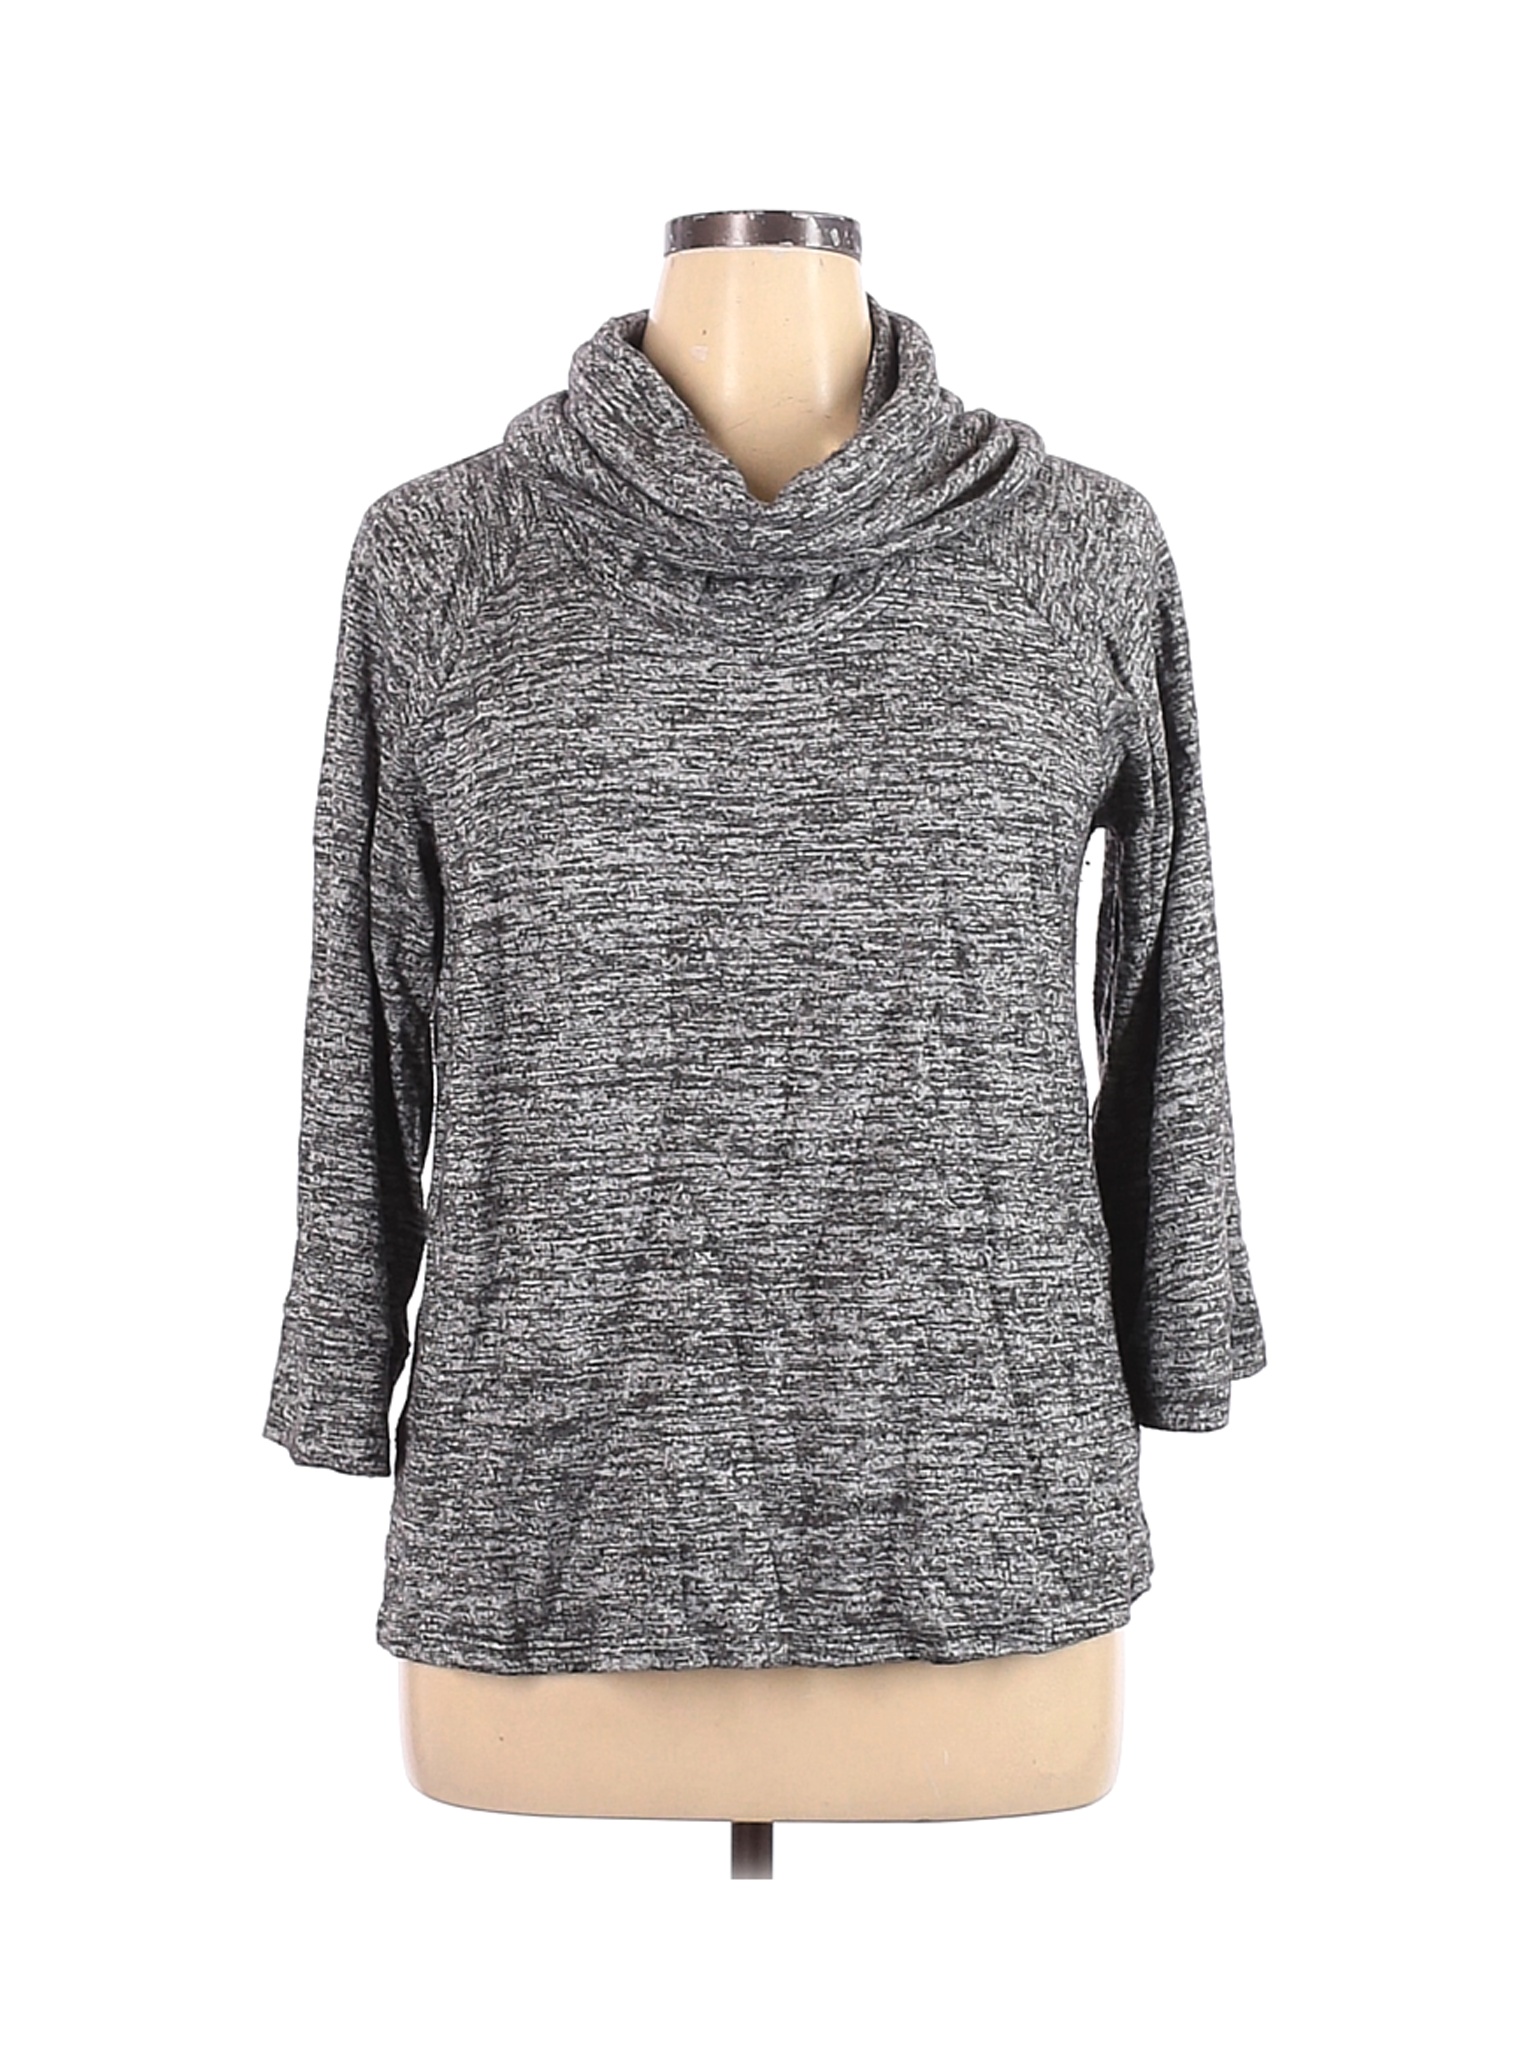 Cable & Gauge Women Gray Pullover Sweater XL | eBay